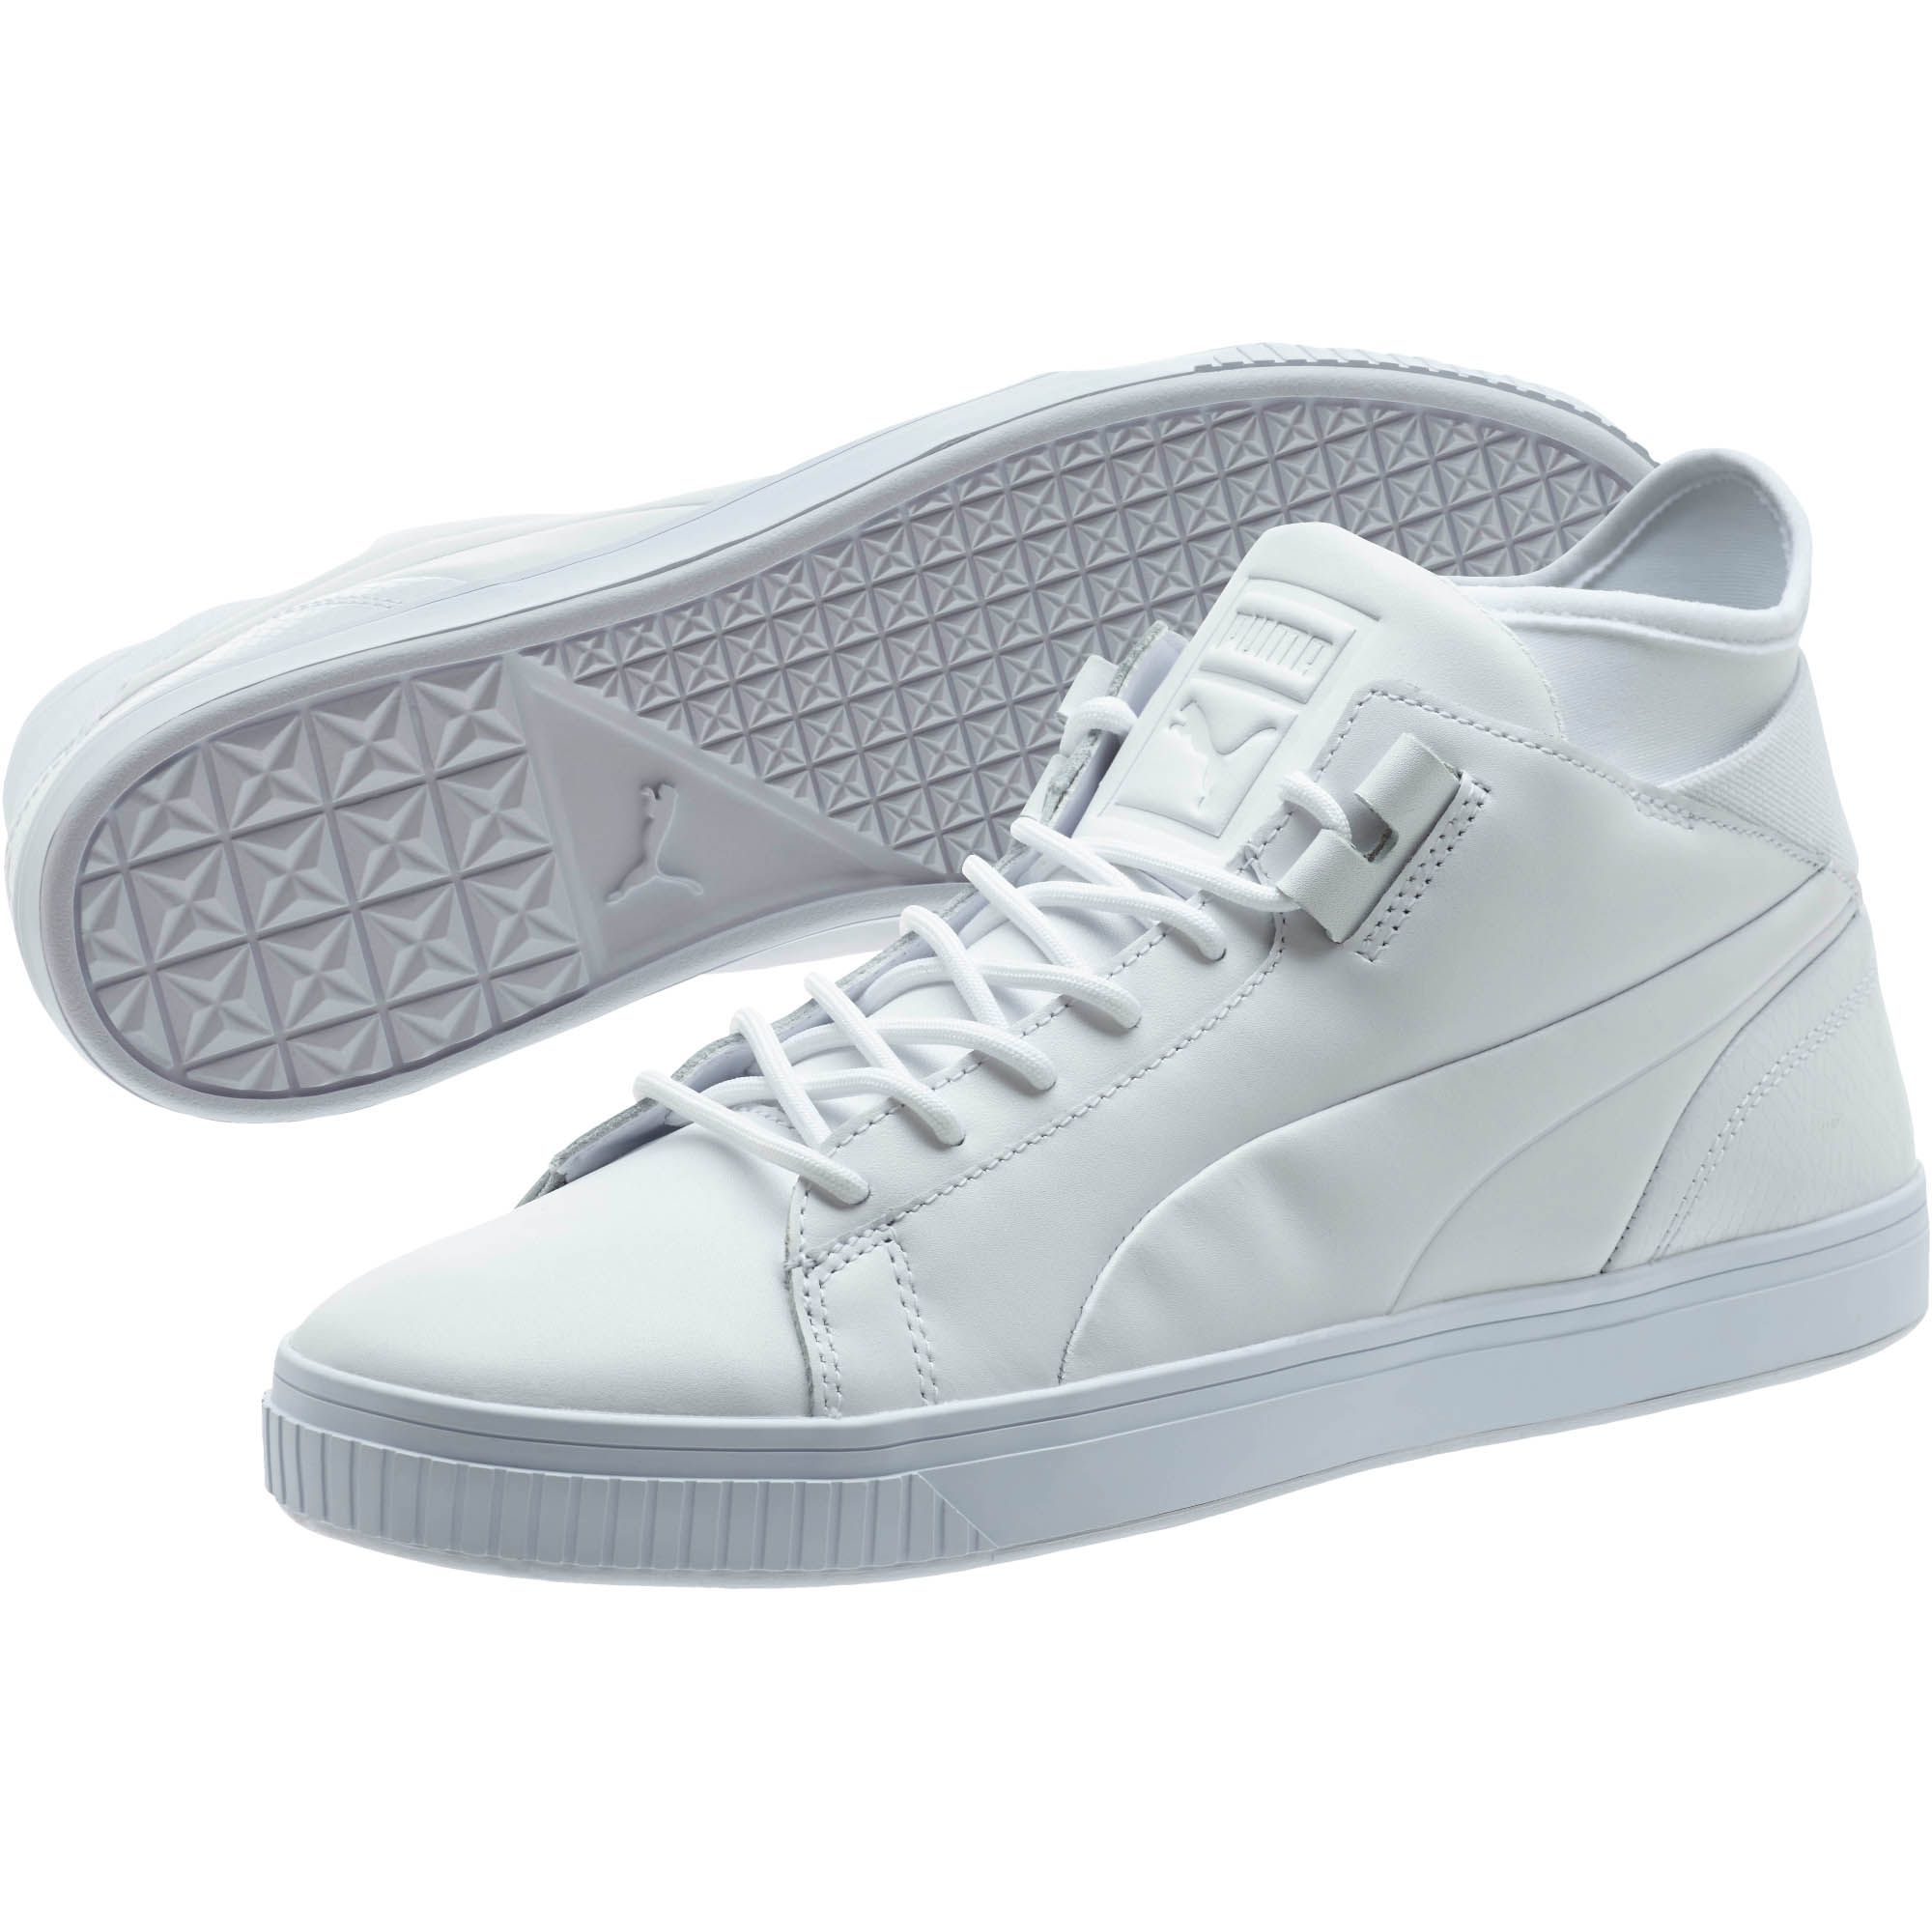 PUMA Leather Play Prm Men's Sneakers for Men - Lyst